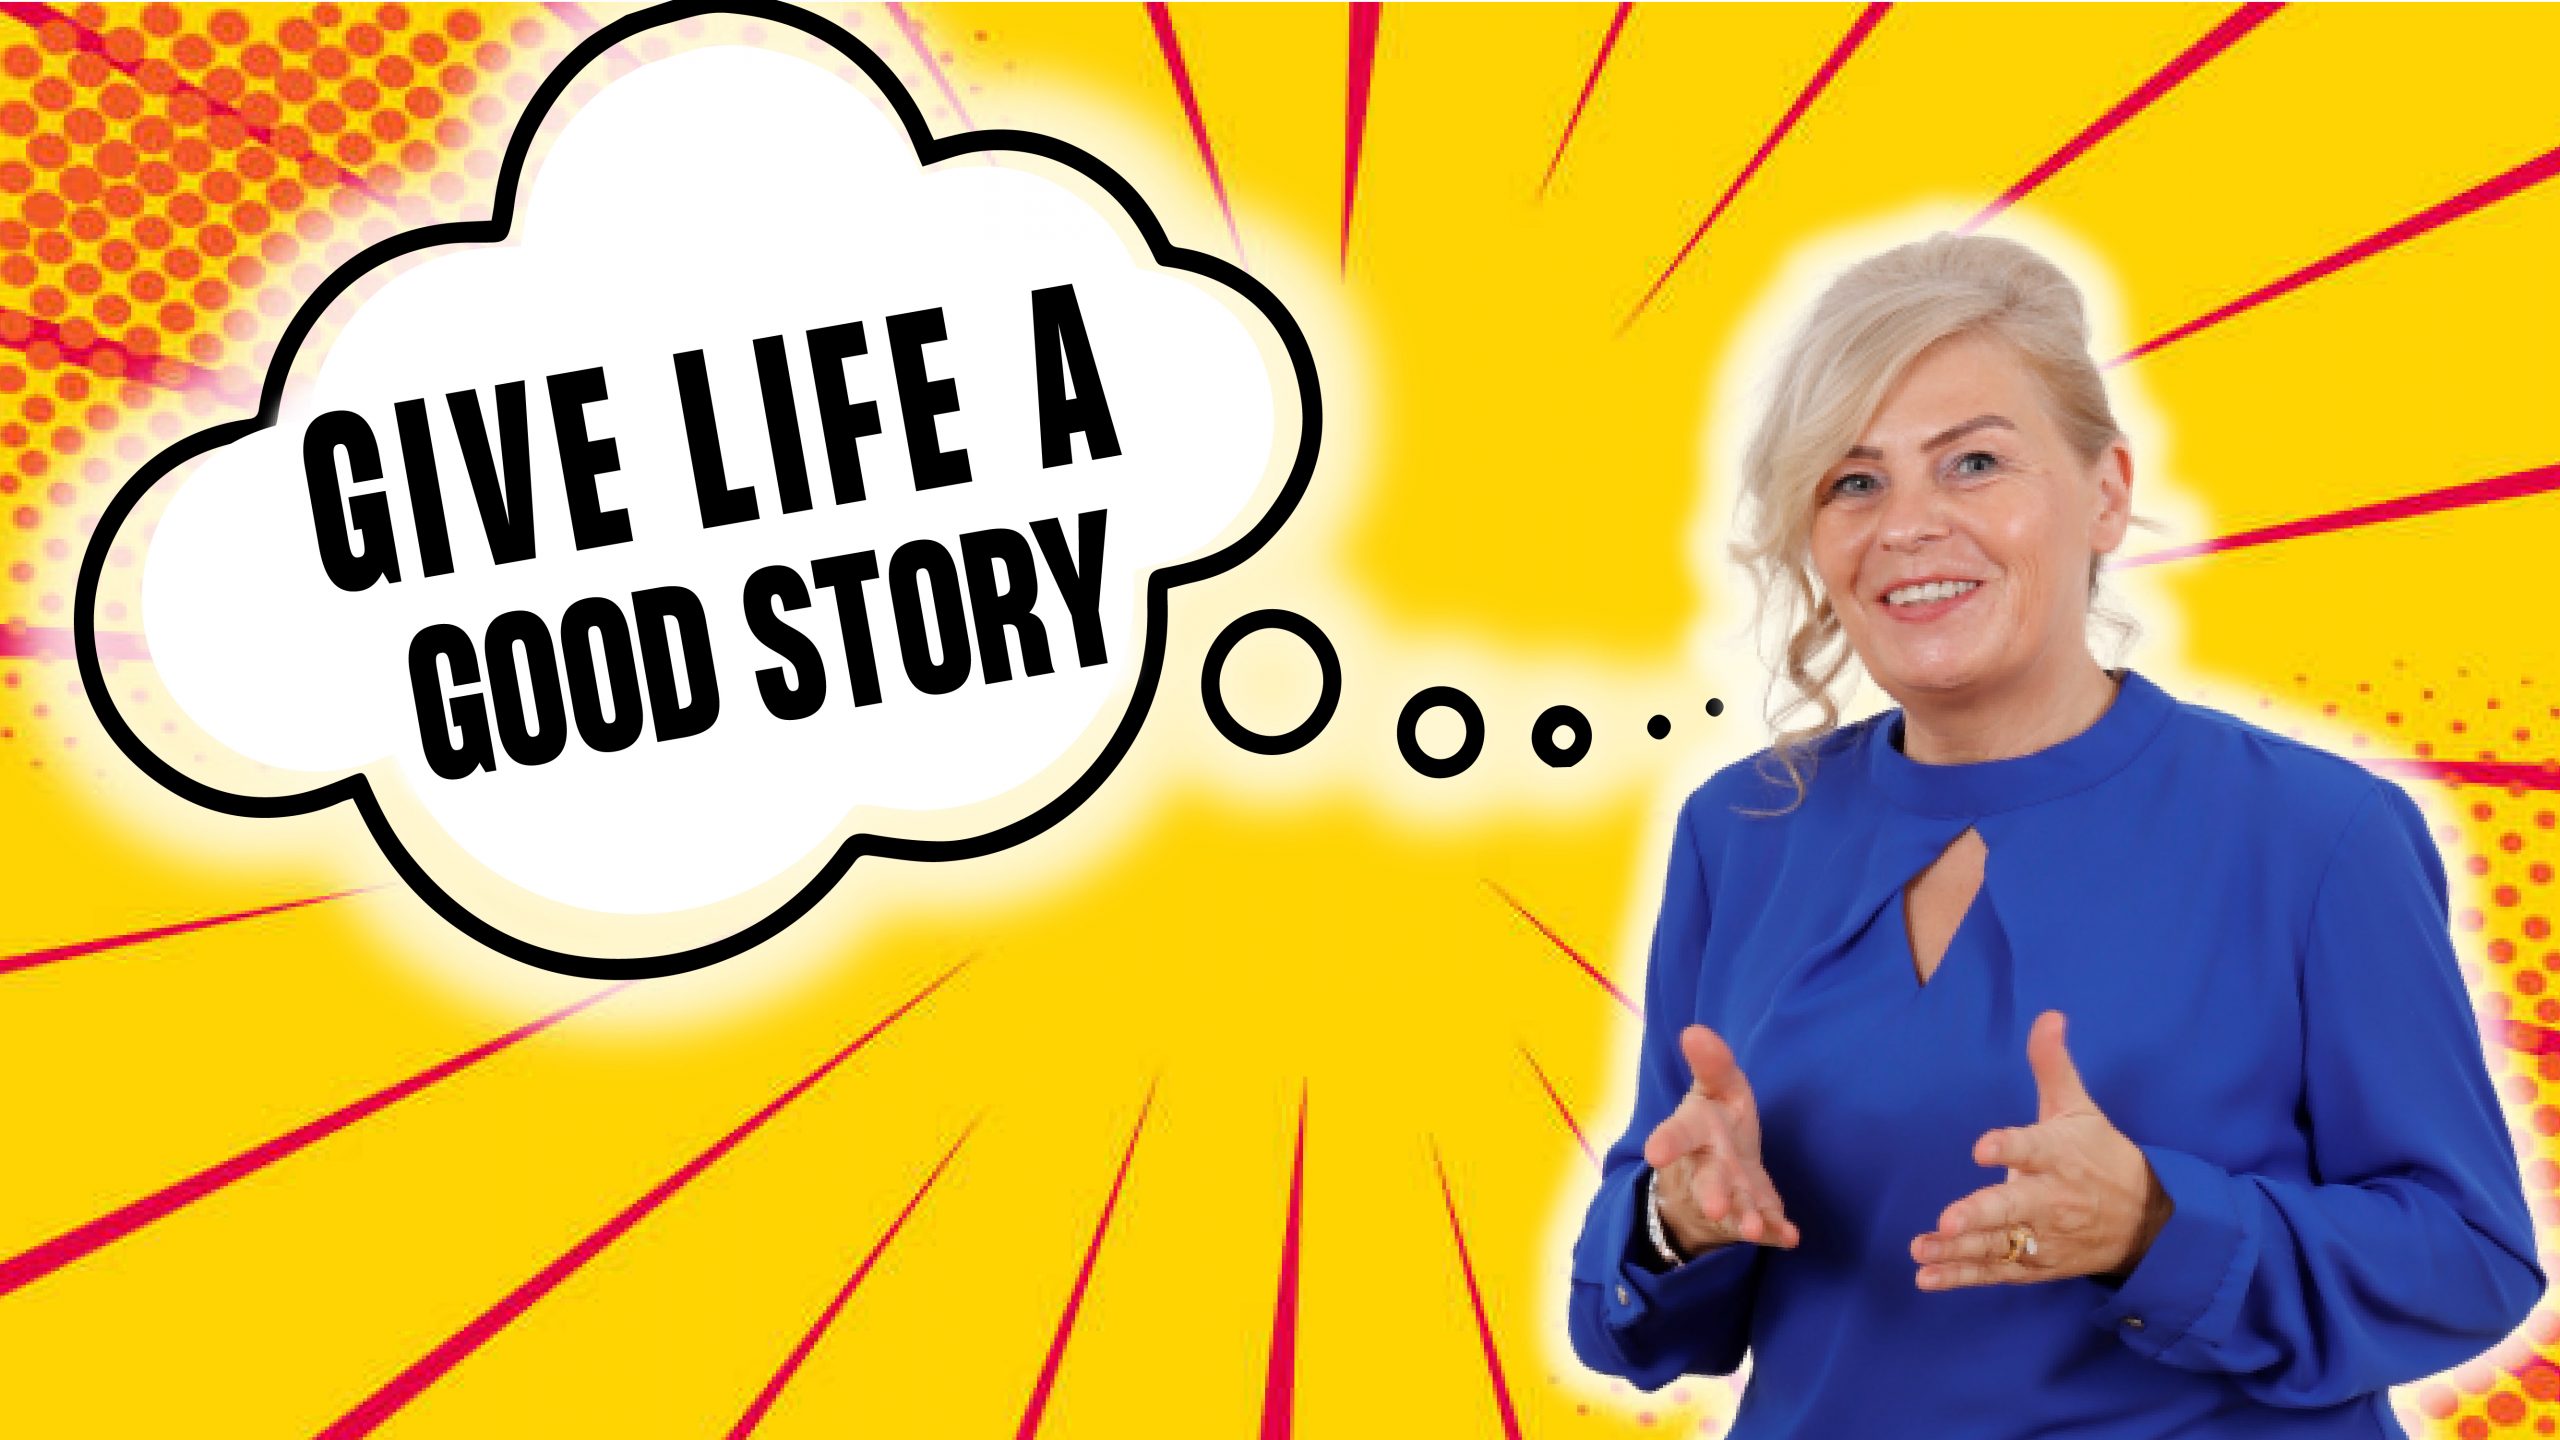  Give Life a good story! 